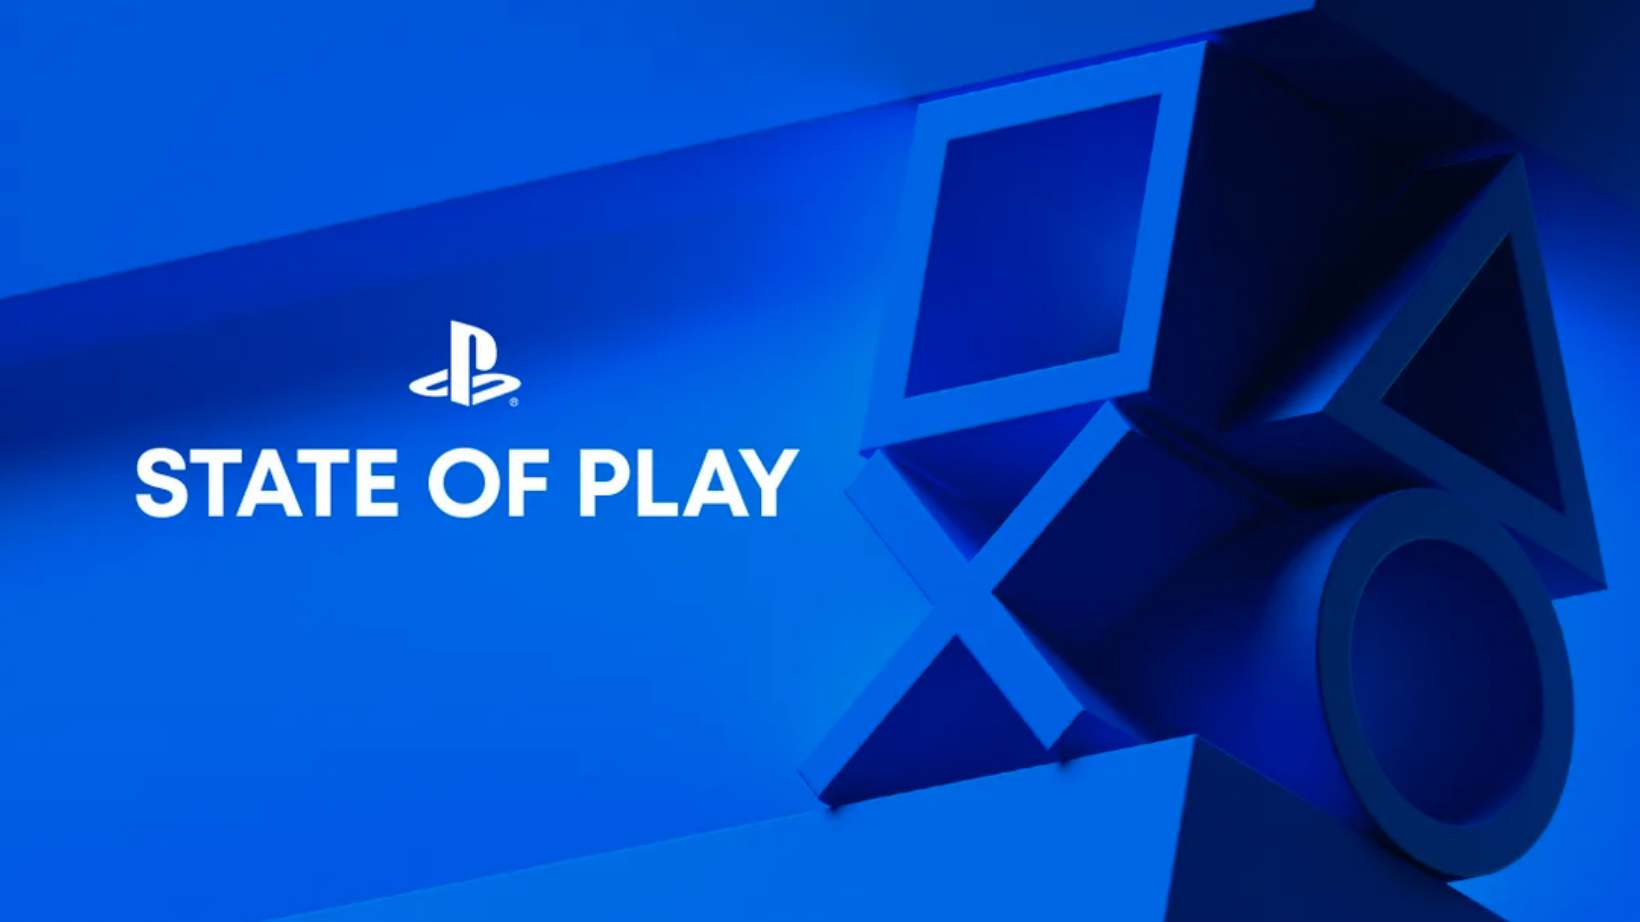 PlayStation State of Play Wrap-up